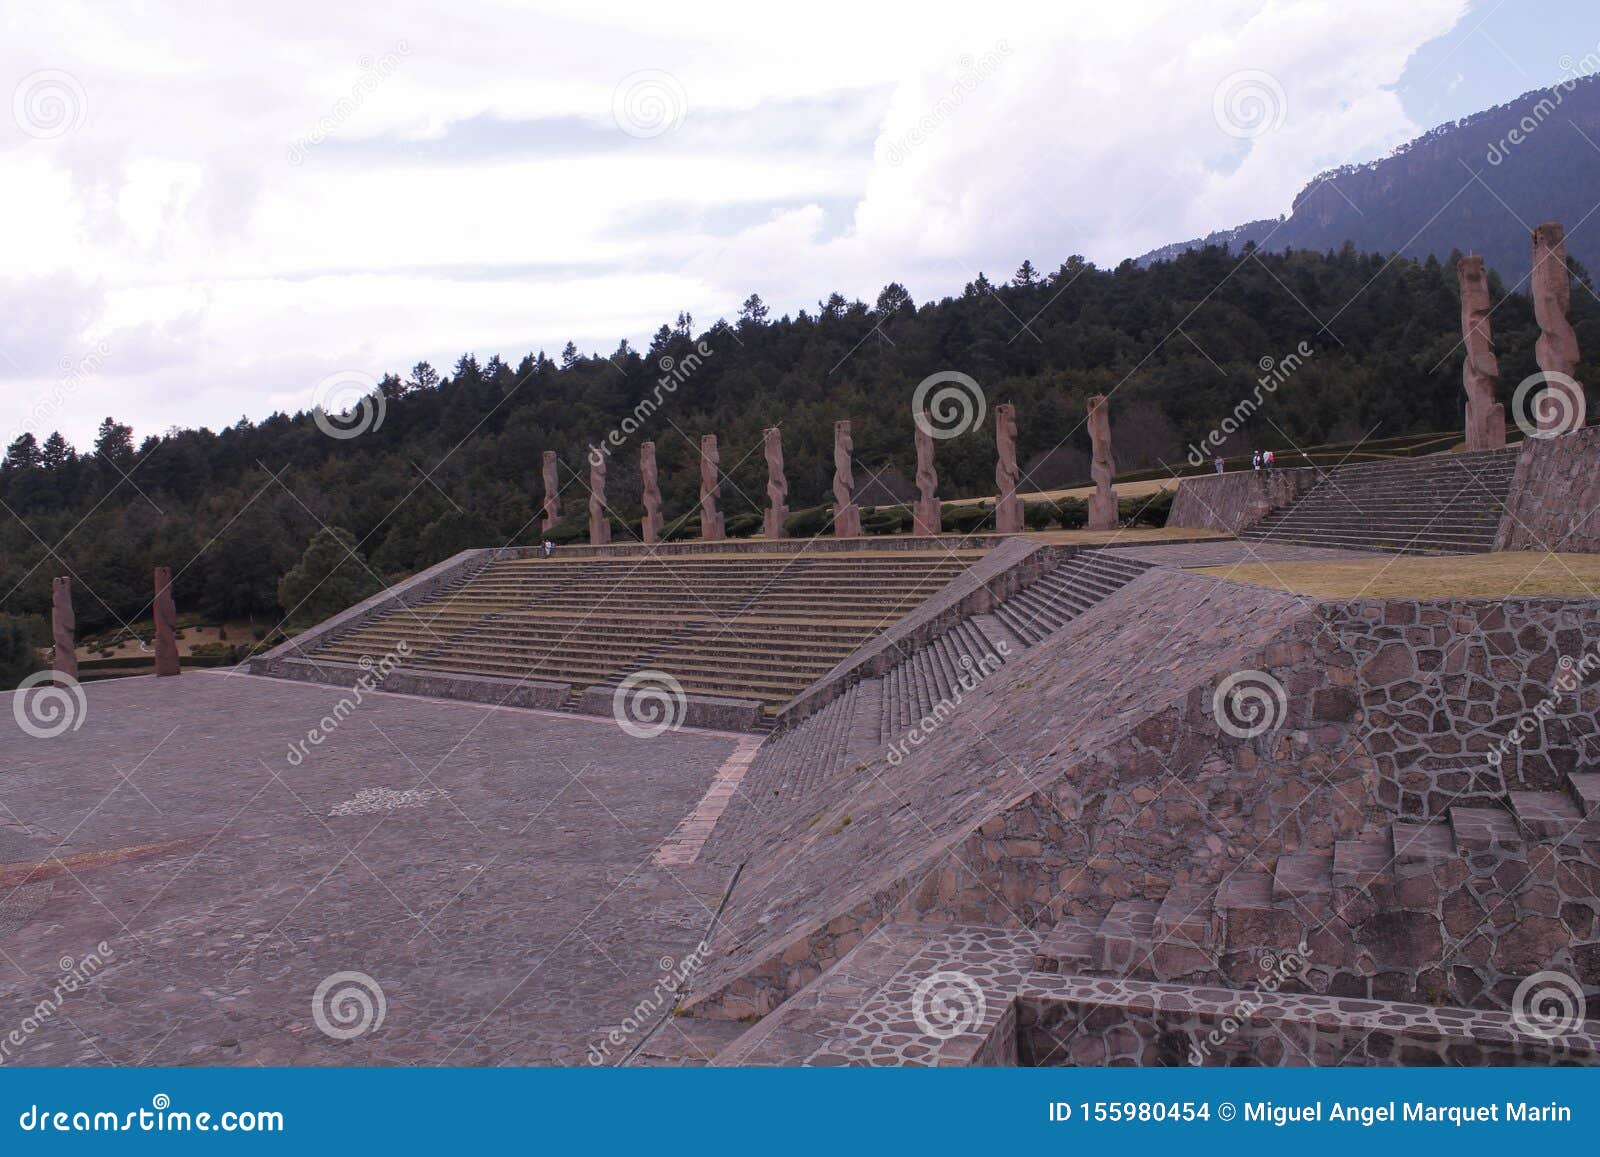 the other side of monuments on top of stairs, centro ceremonial otomi in estado de mexico. side view